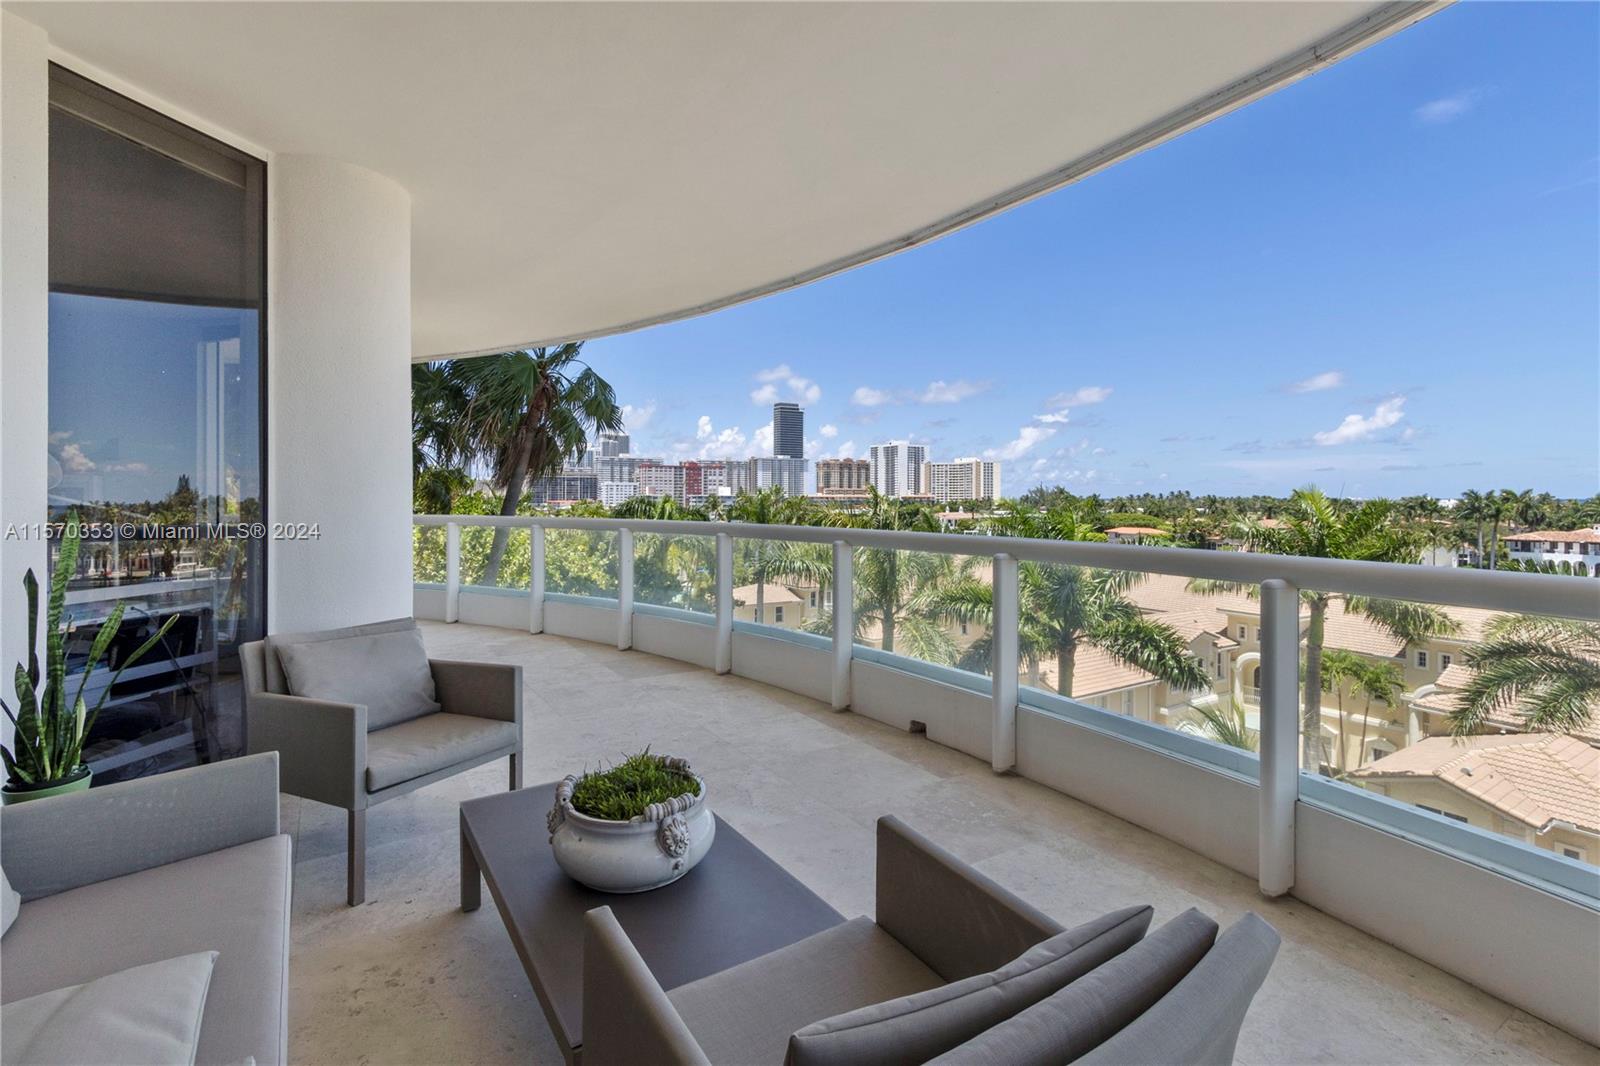 Atlantic III at The Point Condo / 3 Beds / 3.5 Baths / 2,970 sq. ft. of living area / Beautiful Balcony Overlooking the Intracoastal / Walk-in Closets / Amenities Include: State of The Art 25,000 SF Spa, Cafe, Large Luxurious Party Room, Card Room, Library & Game Room, Updated Fitness Center, Tennis Court, Heated Pool, BBQ's & Kids Play Area. Secure and Gated Community with 24 Hr. Valet Parking & Doorman Security.